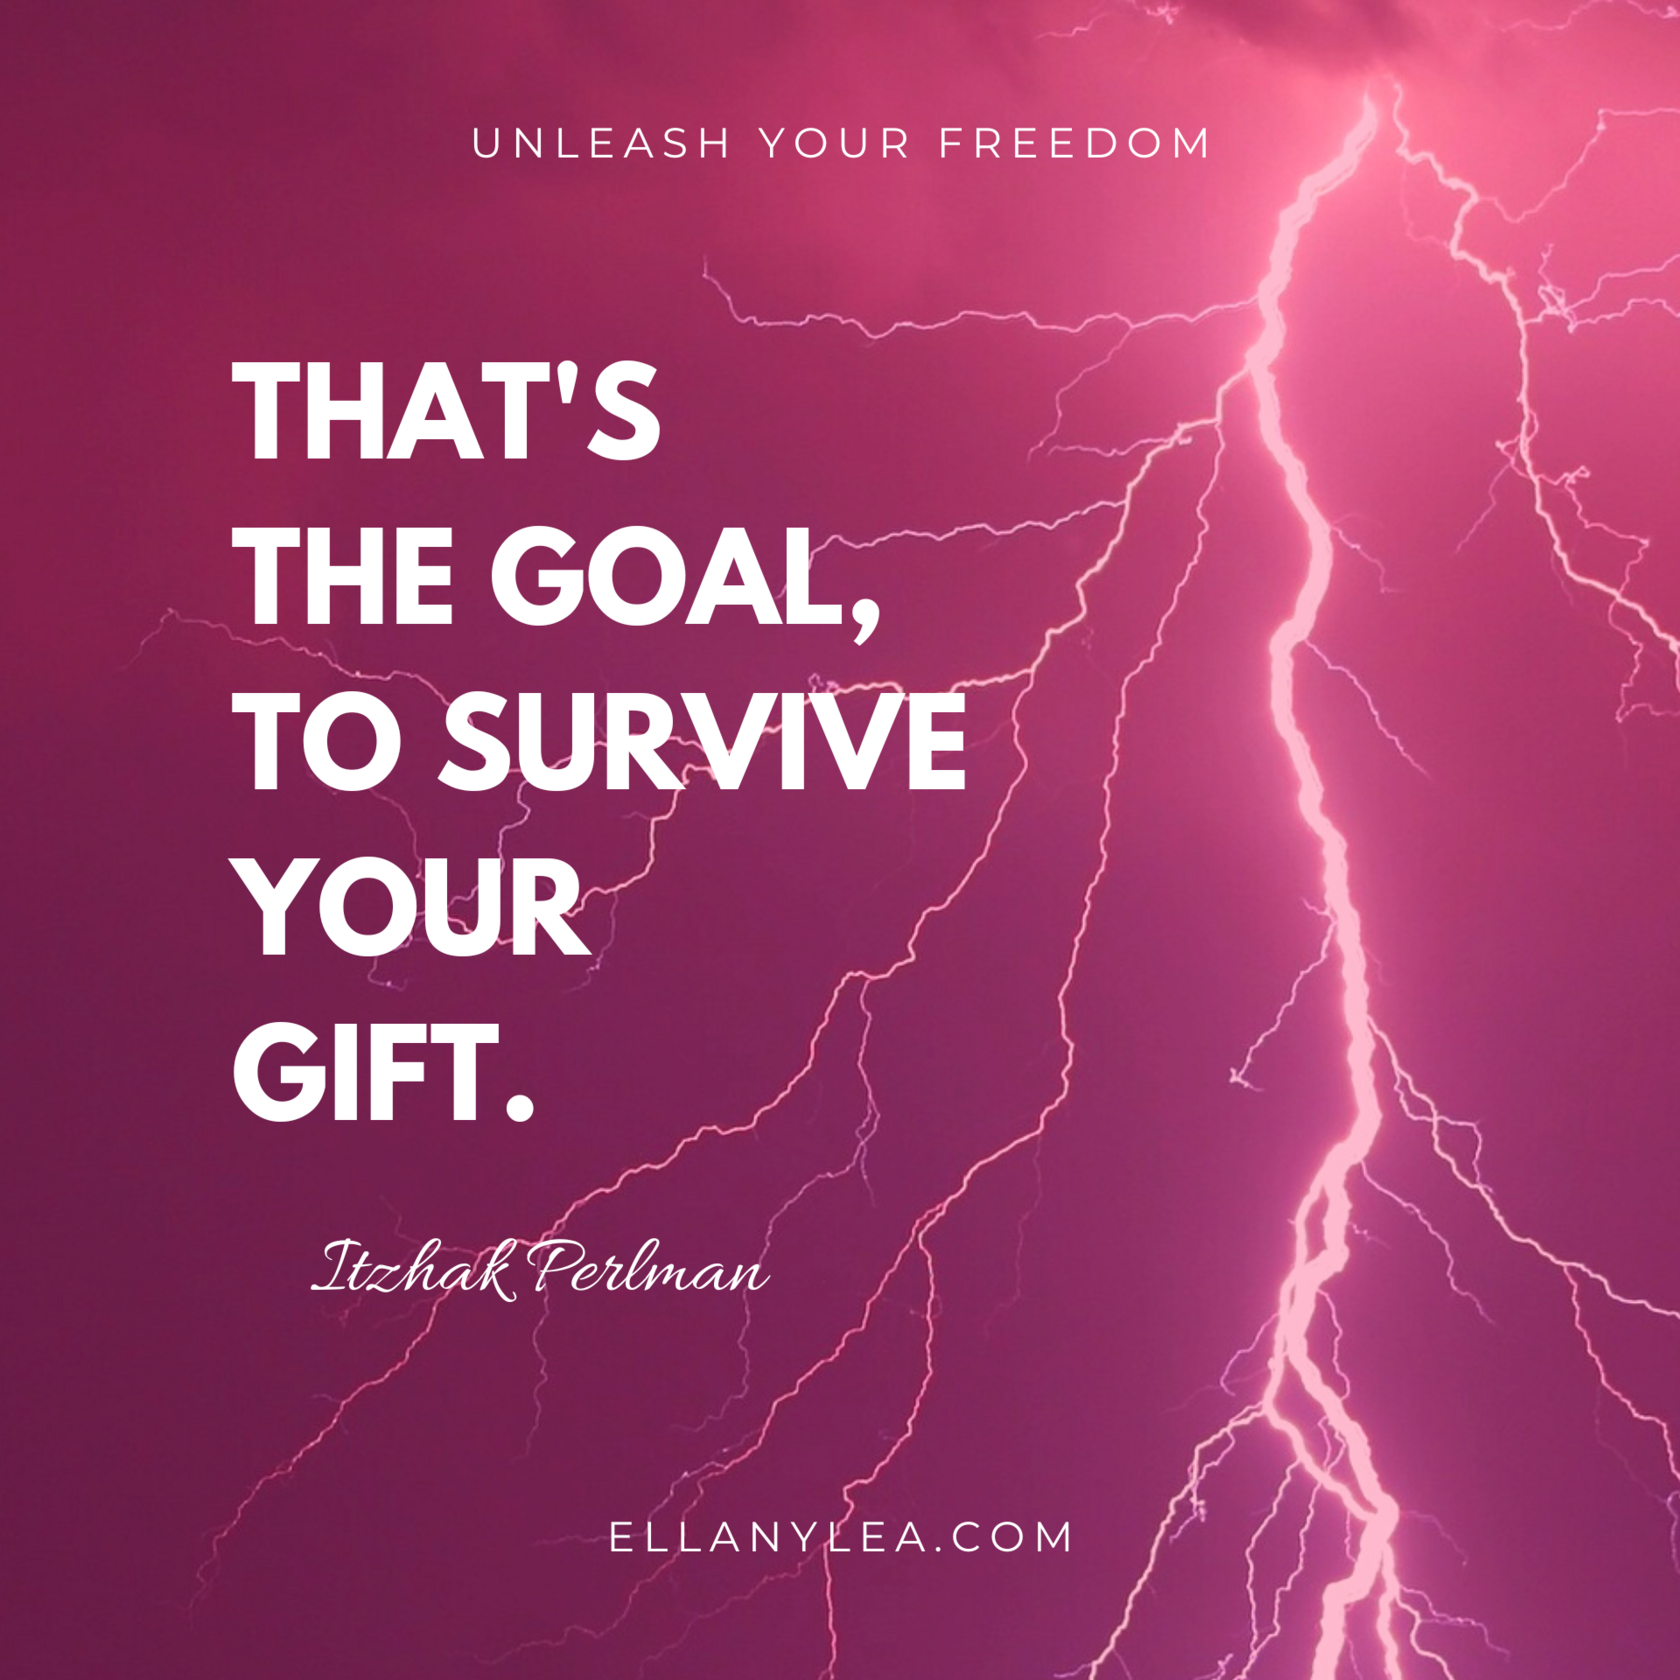 quote - the goal survive your gift